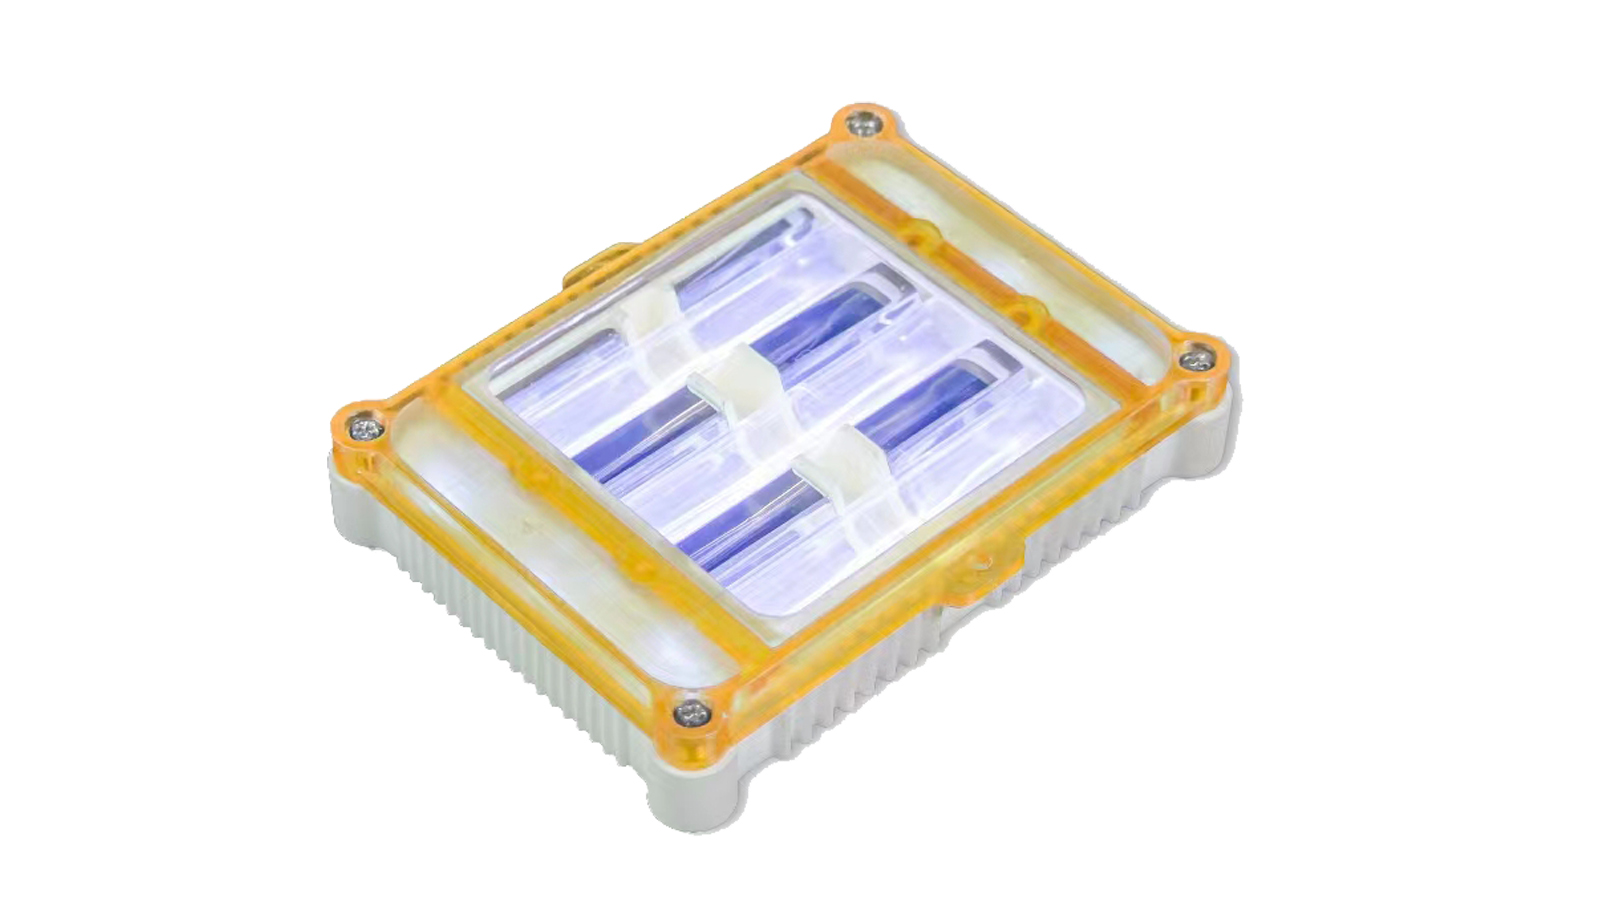 Light for Medical Disinfection and Infection Control - 222nm UV Disinfection Module